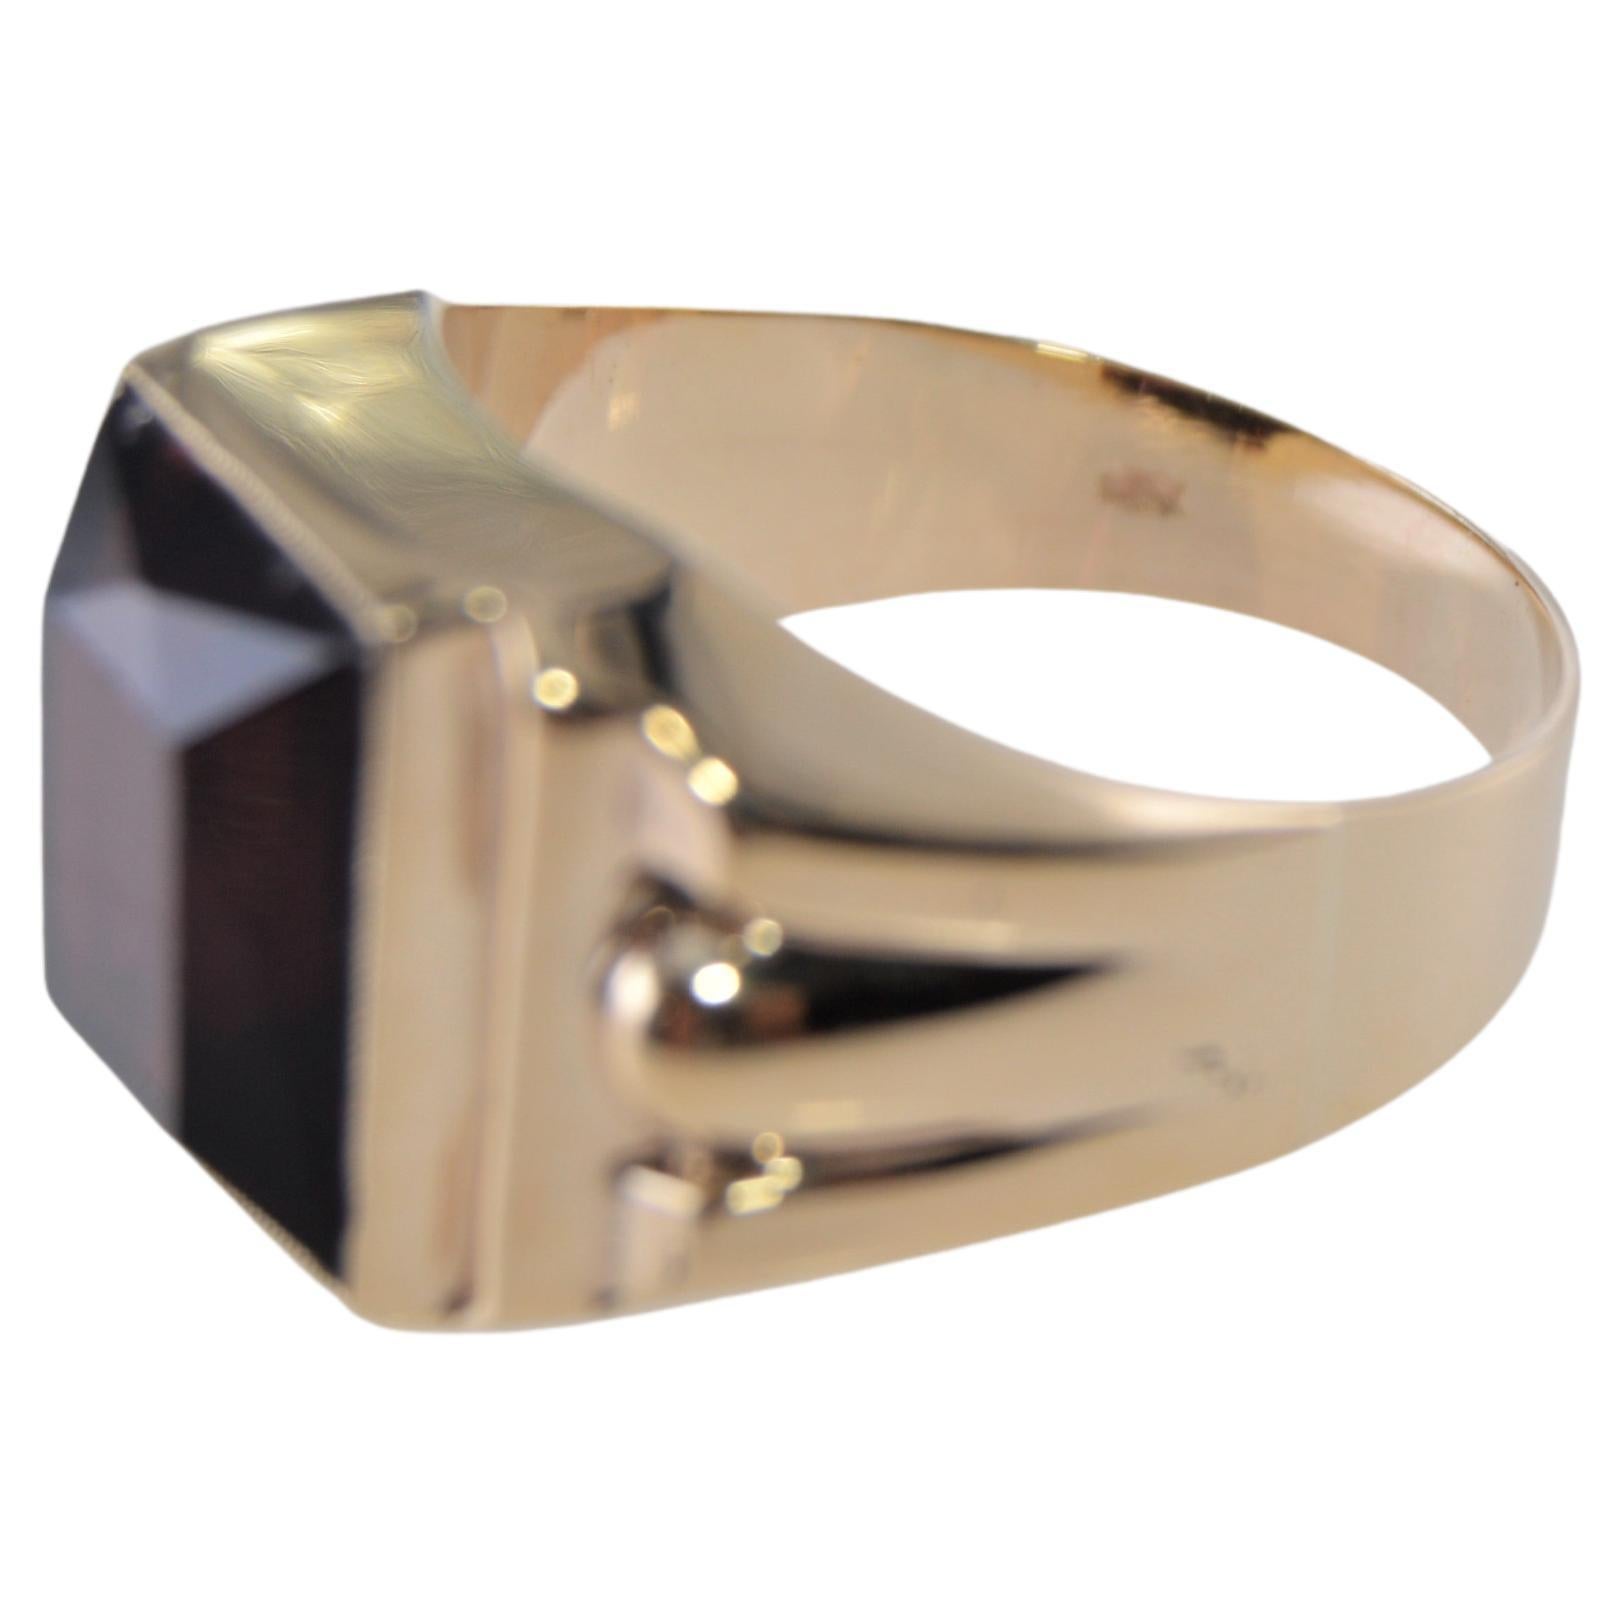 Art Deco Ring in Solid 10Kt. Yellow Gold from 1940's Size 9 Hand Constructed For Sale 6